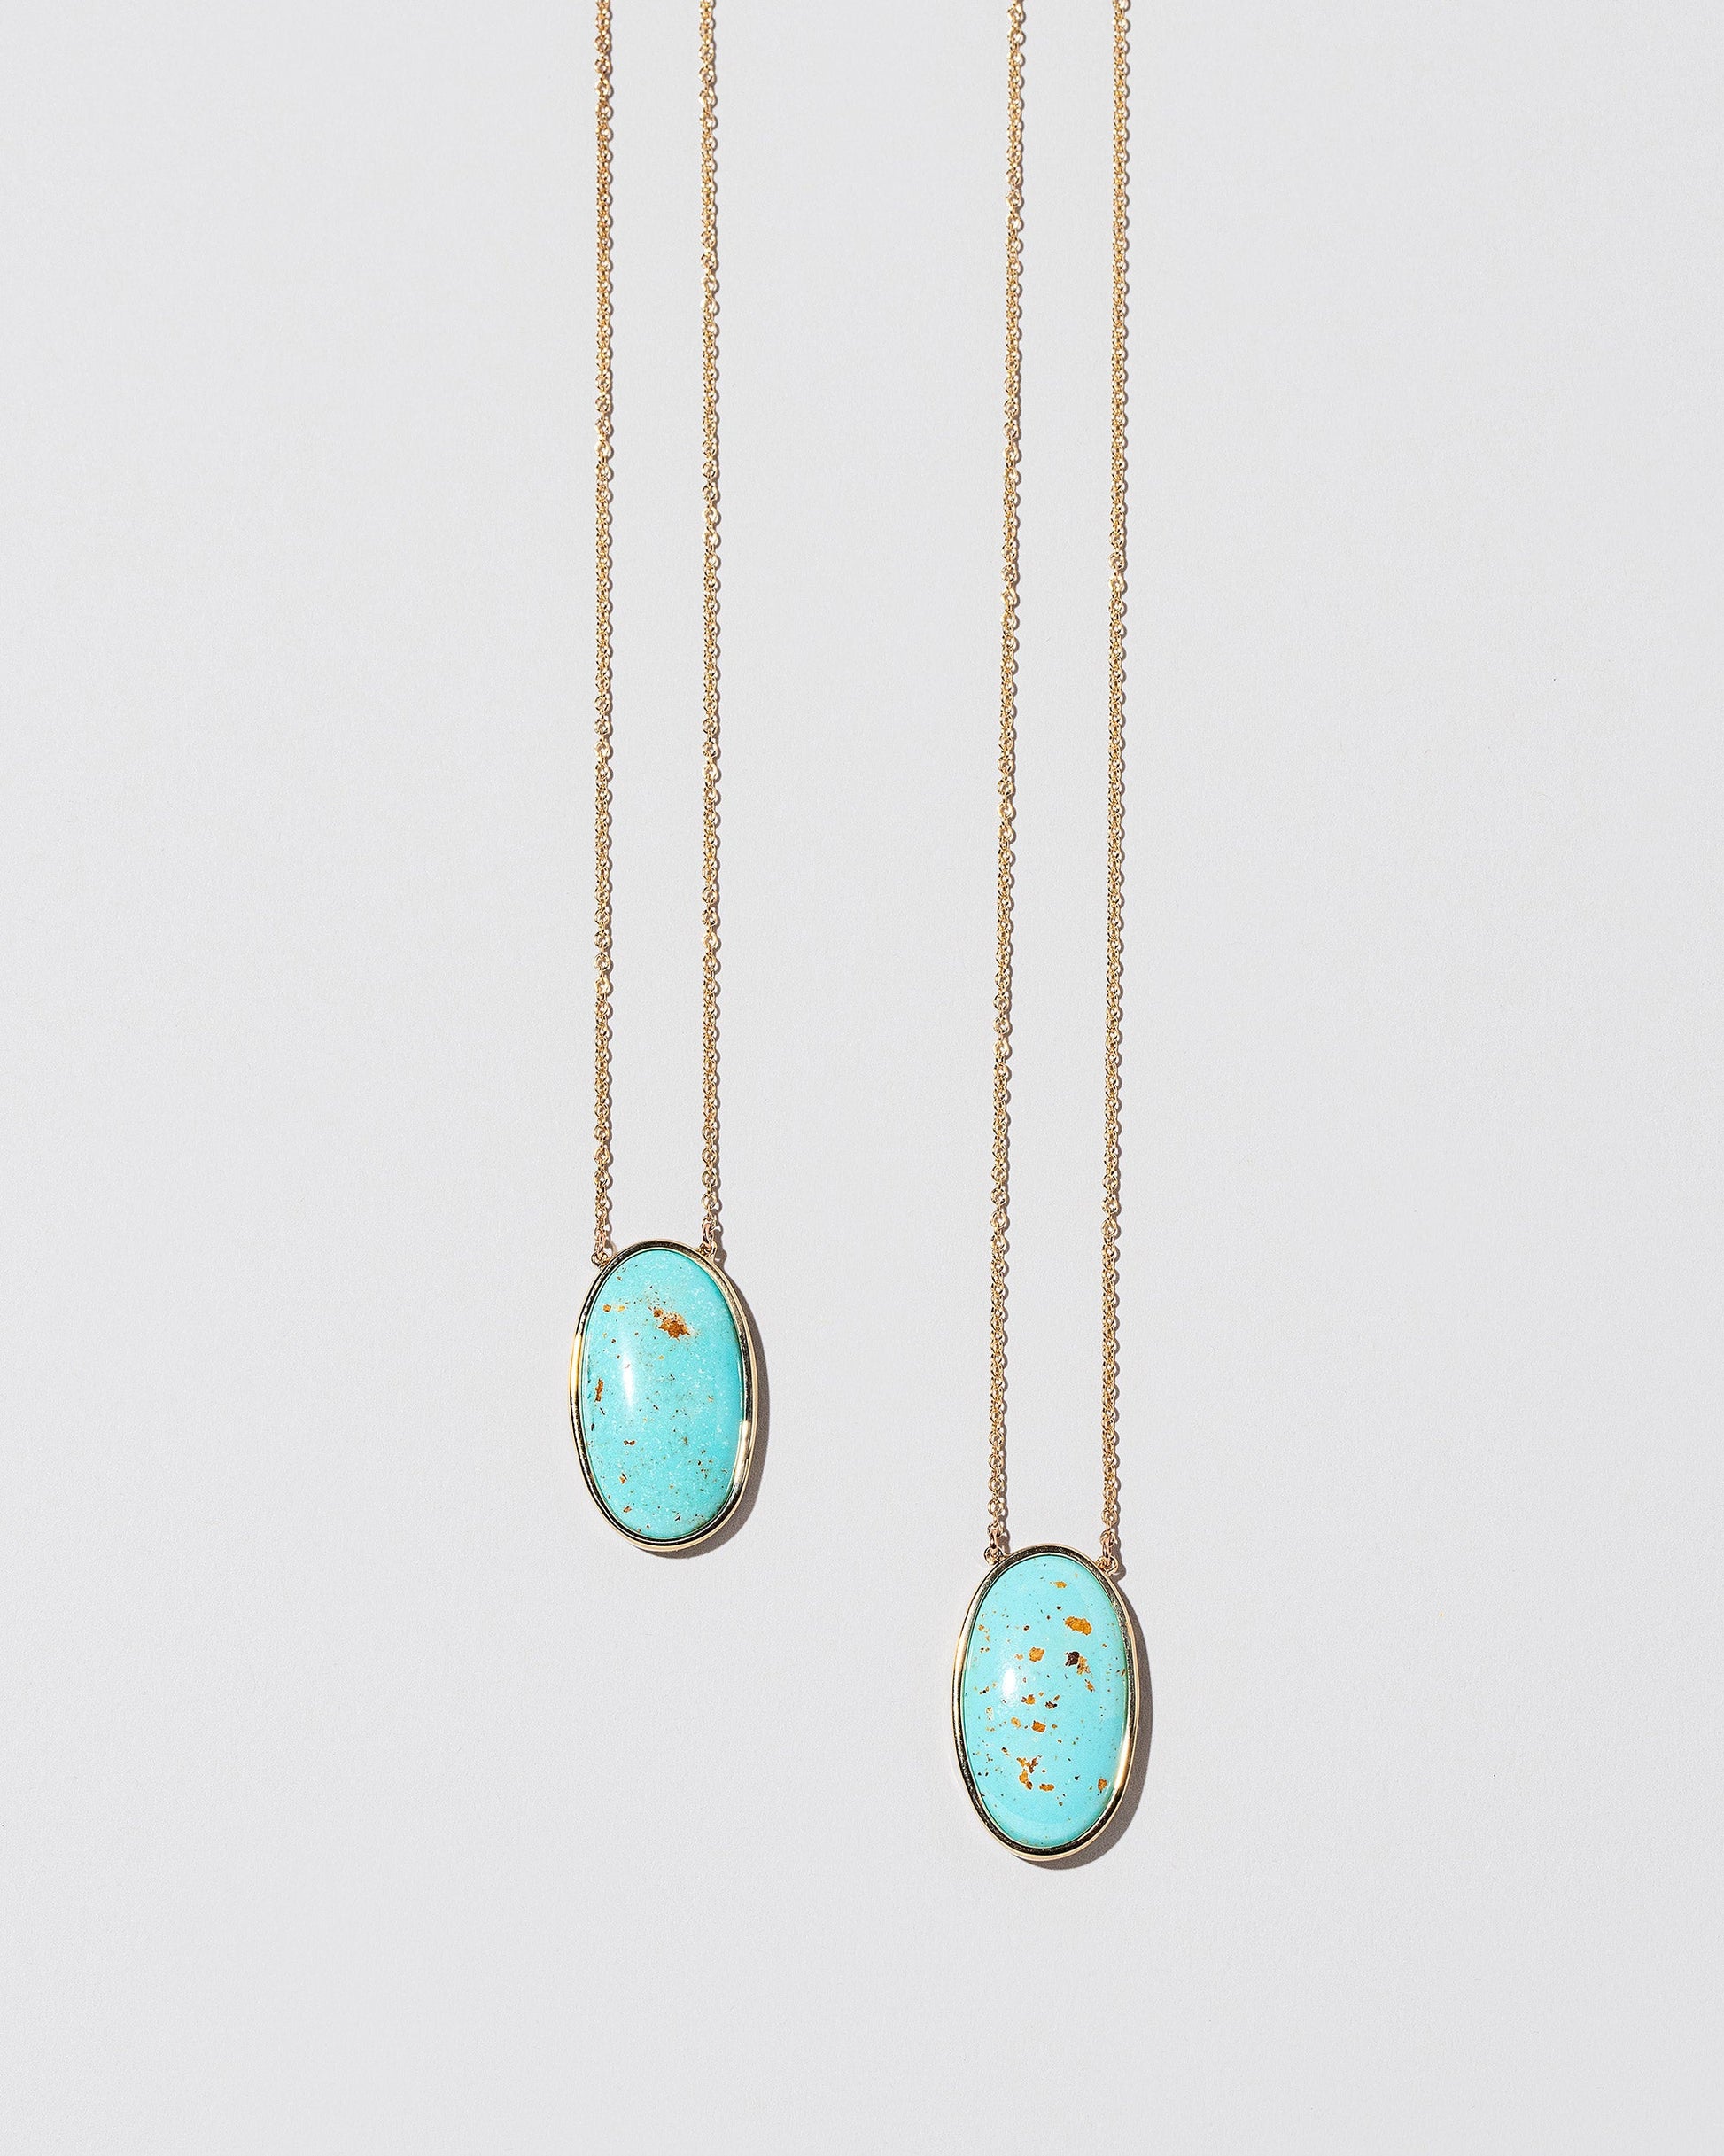 Group of  Turquoise Necklace on light color background.